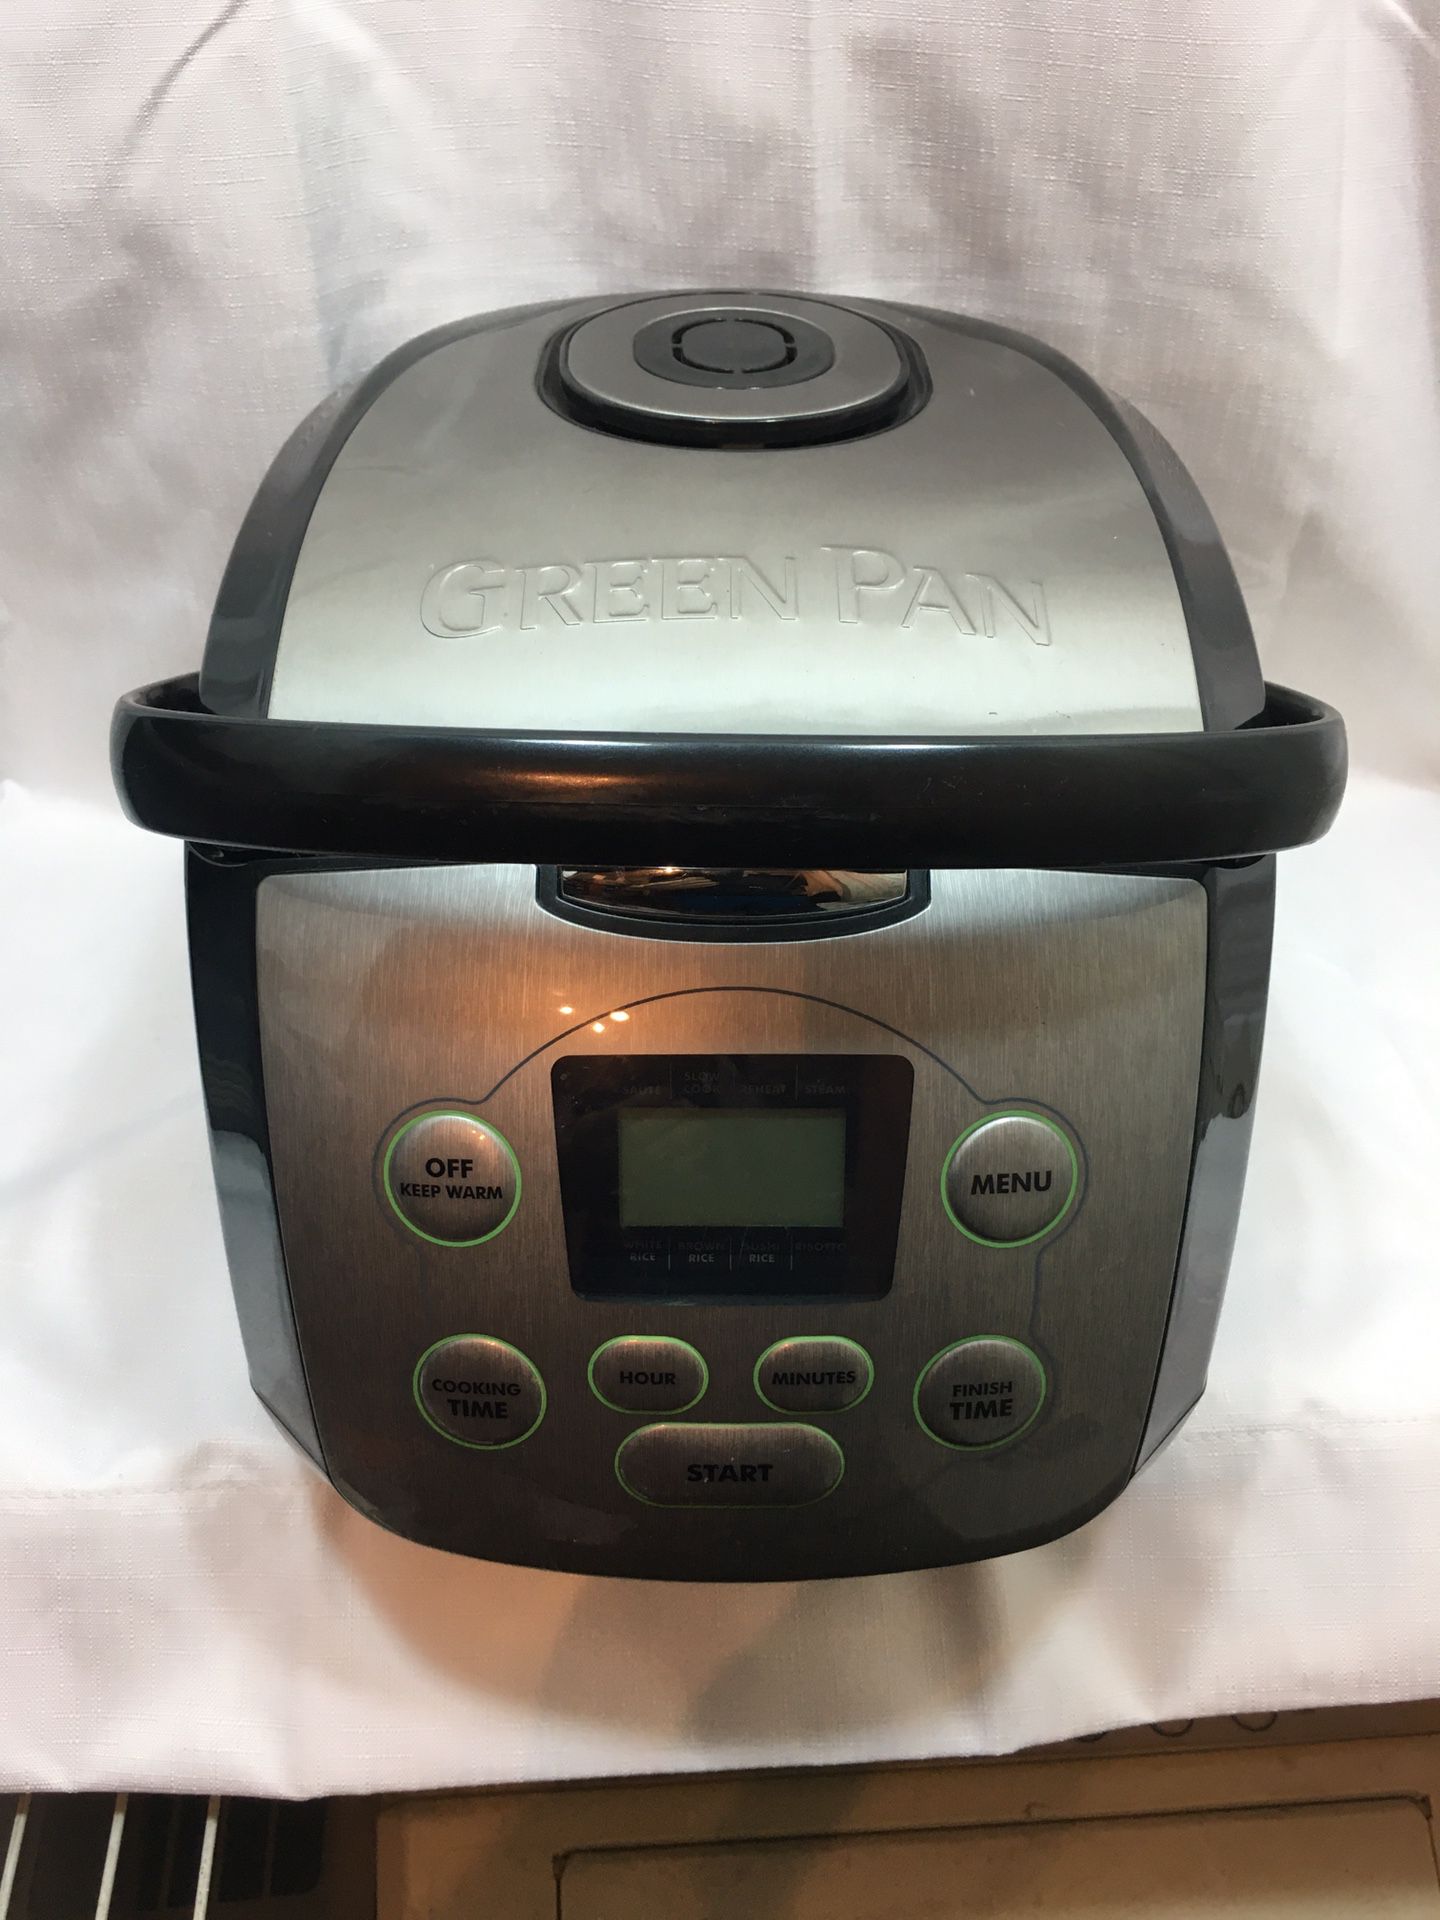 Green Pan Rice Expert Multi Cooker / silver & black Never used in